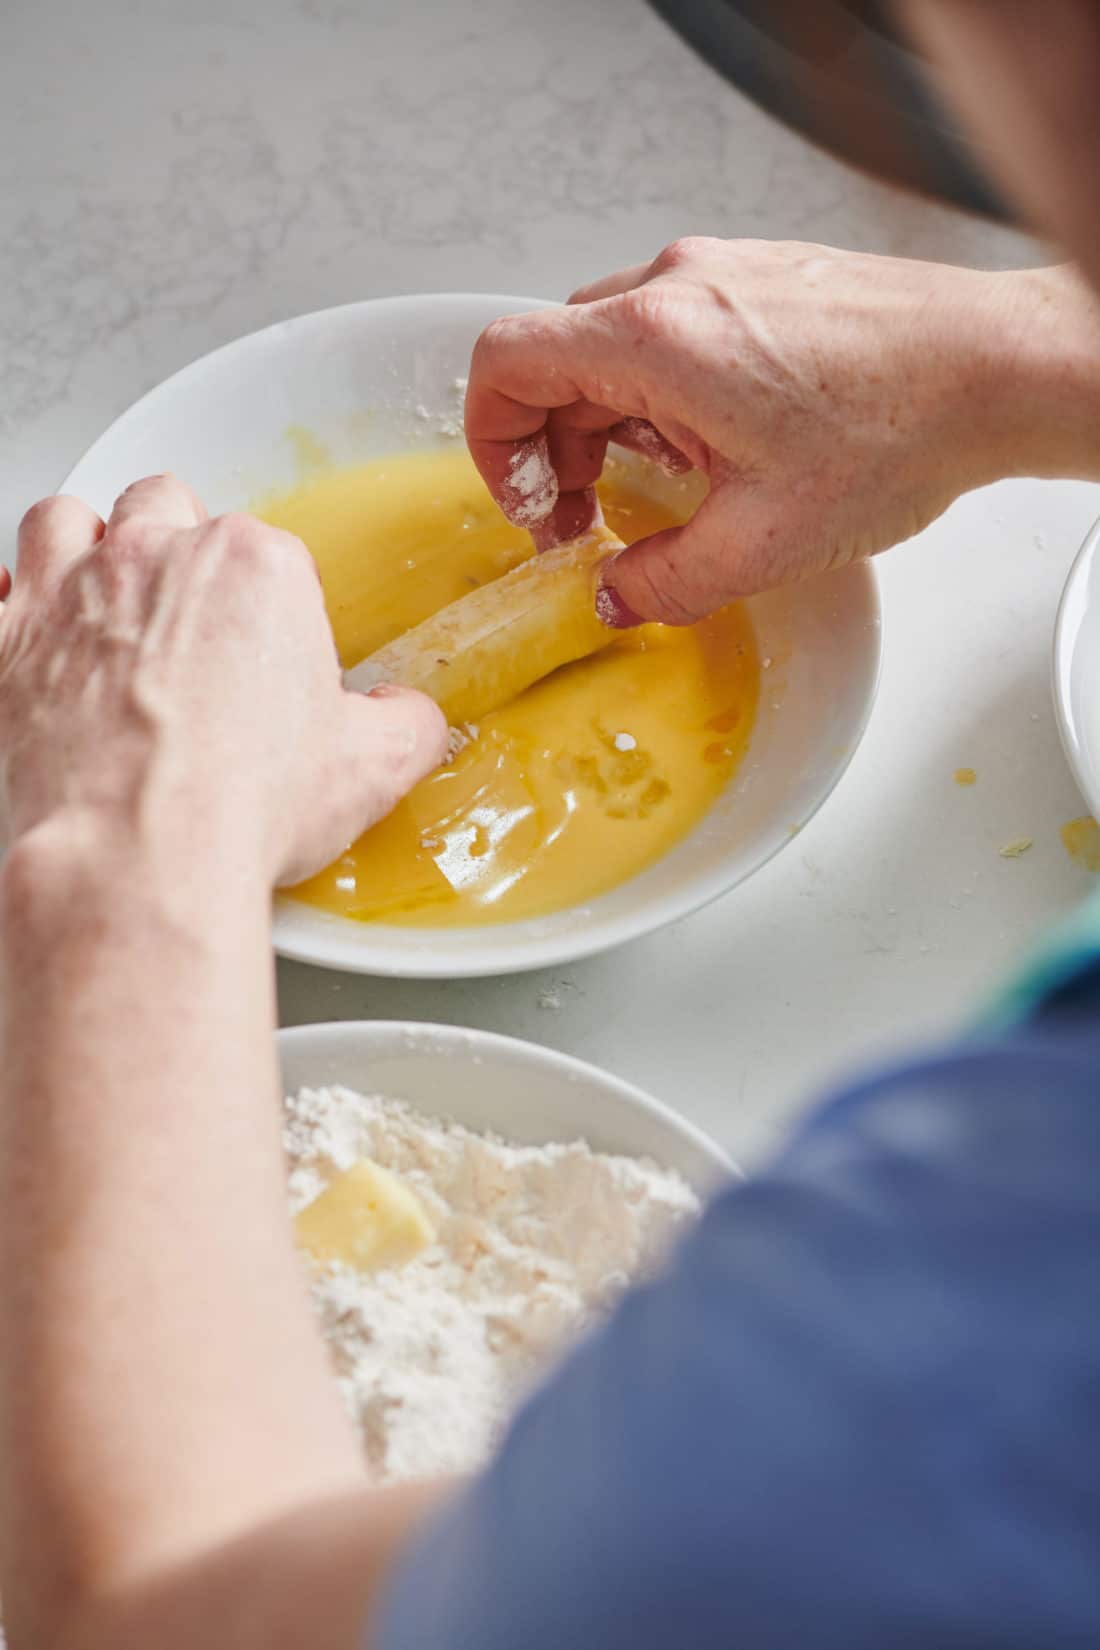 Woman rolling a cheese stick in an egg mixture.